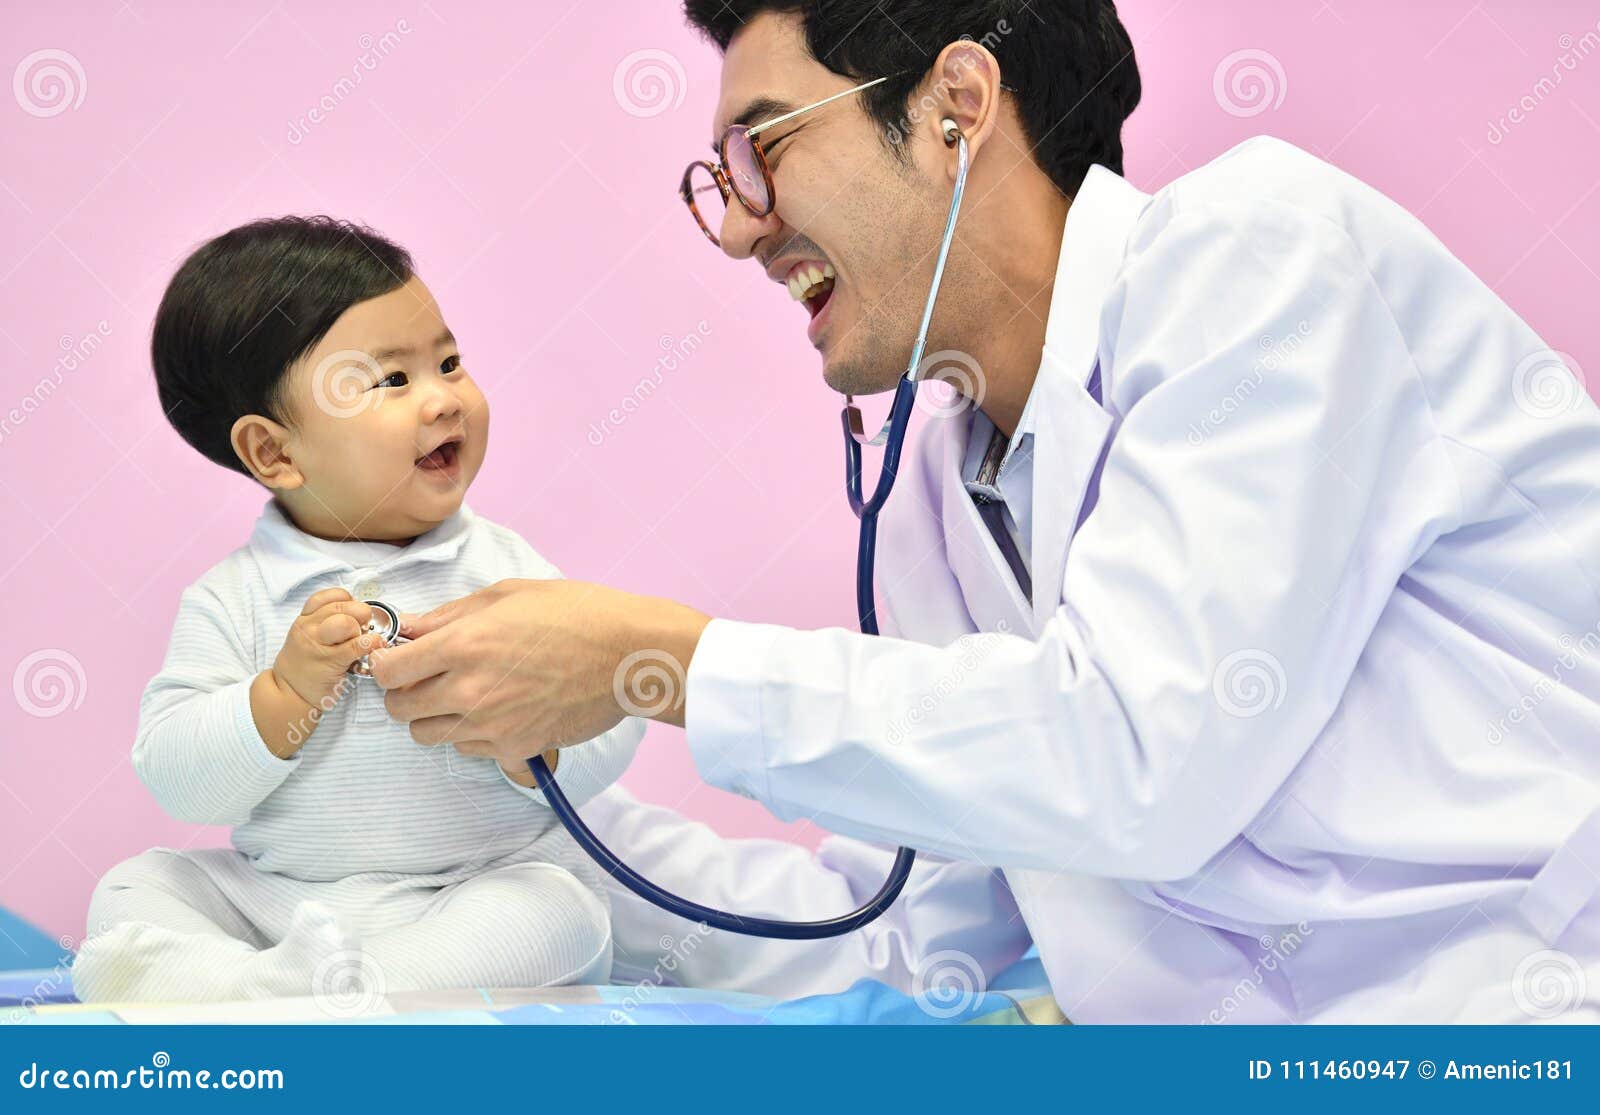 asian paediatrician examining a baby with a stethoscope